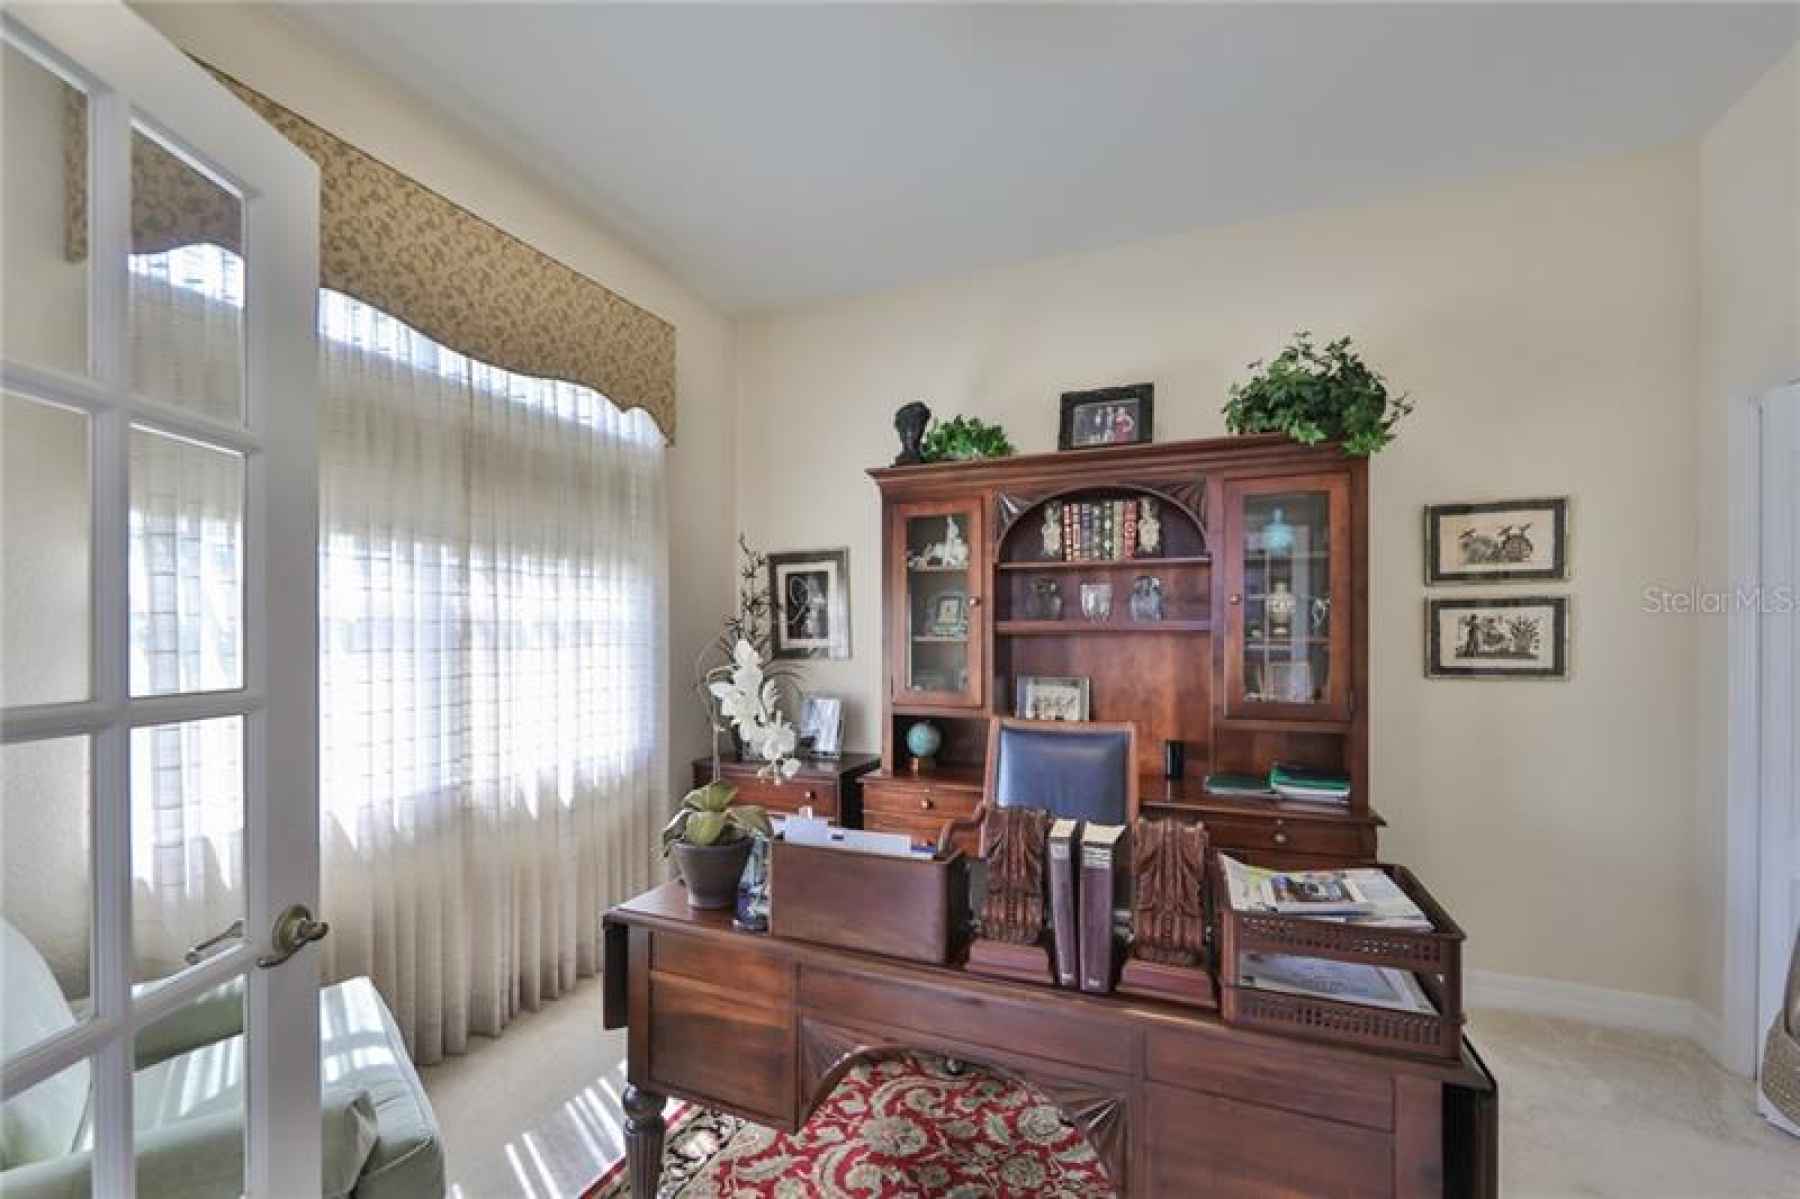 Large windows allow for lots of natural Florida sunhine to flood the room with happiness.